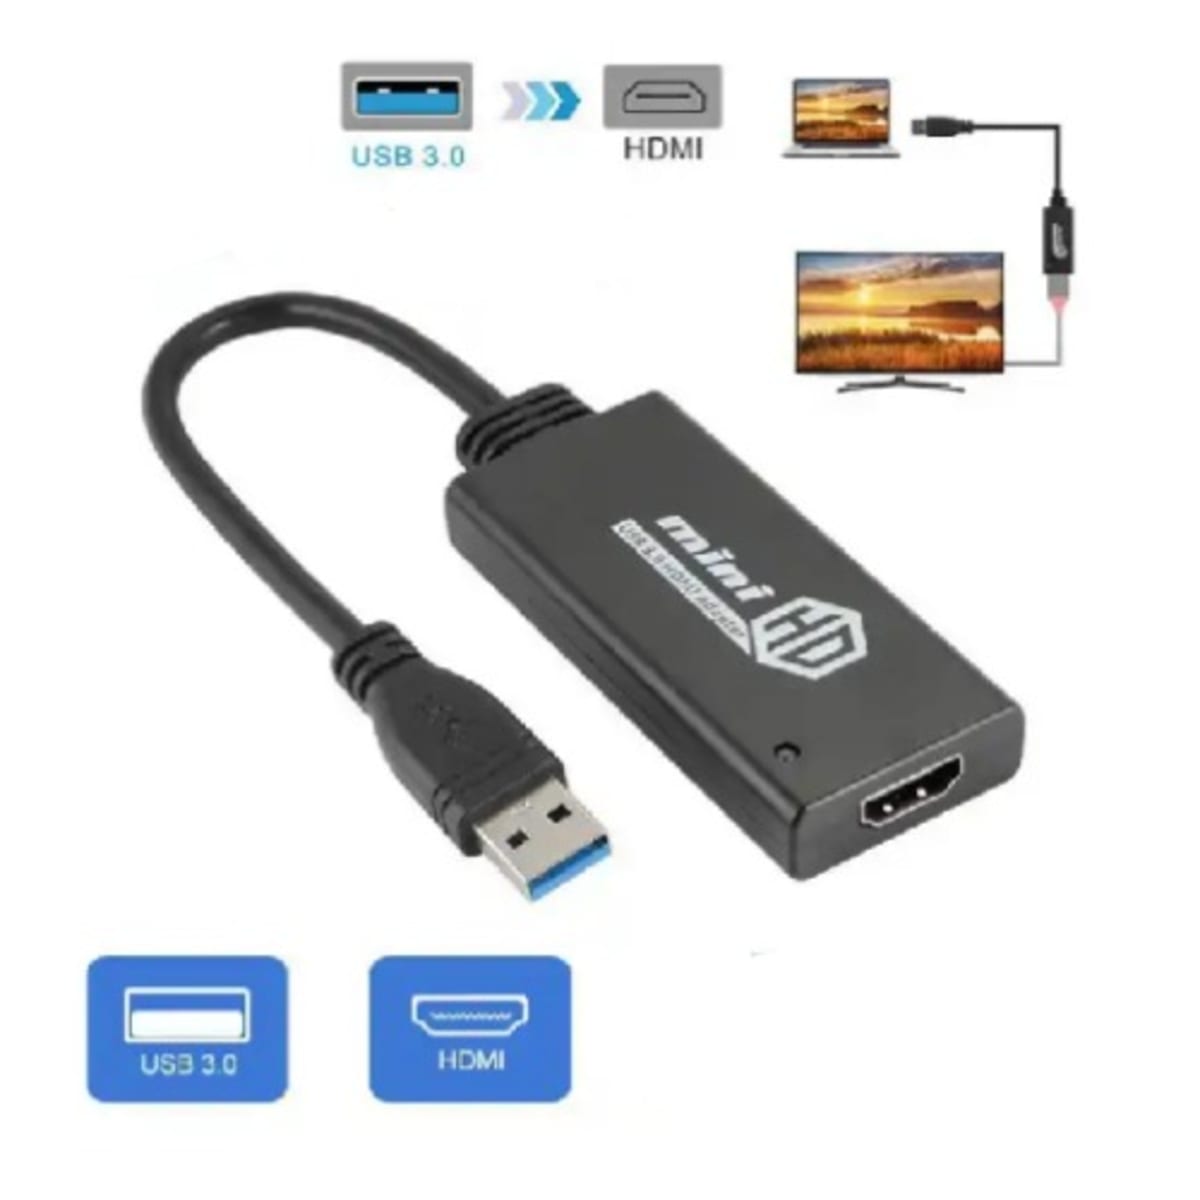 rør Tag ud skuffet USB 3.0 To HDMI Video Adapter Converter | Konga Online Shopping